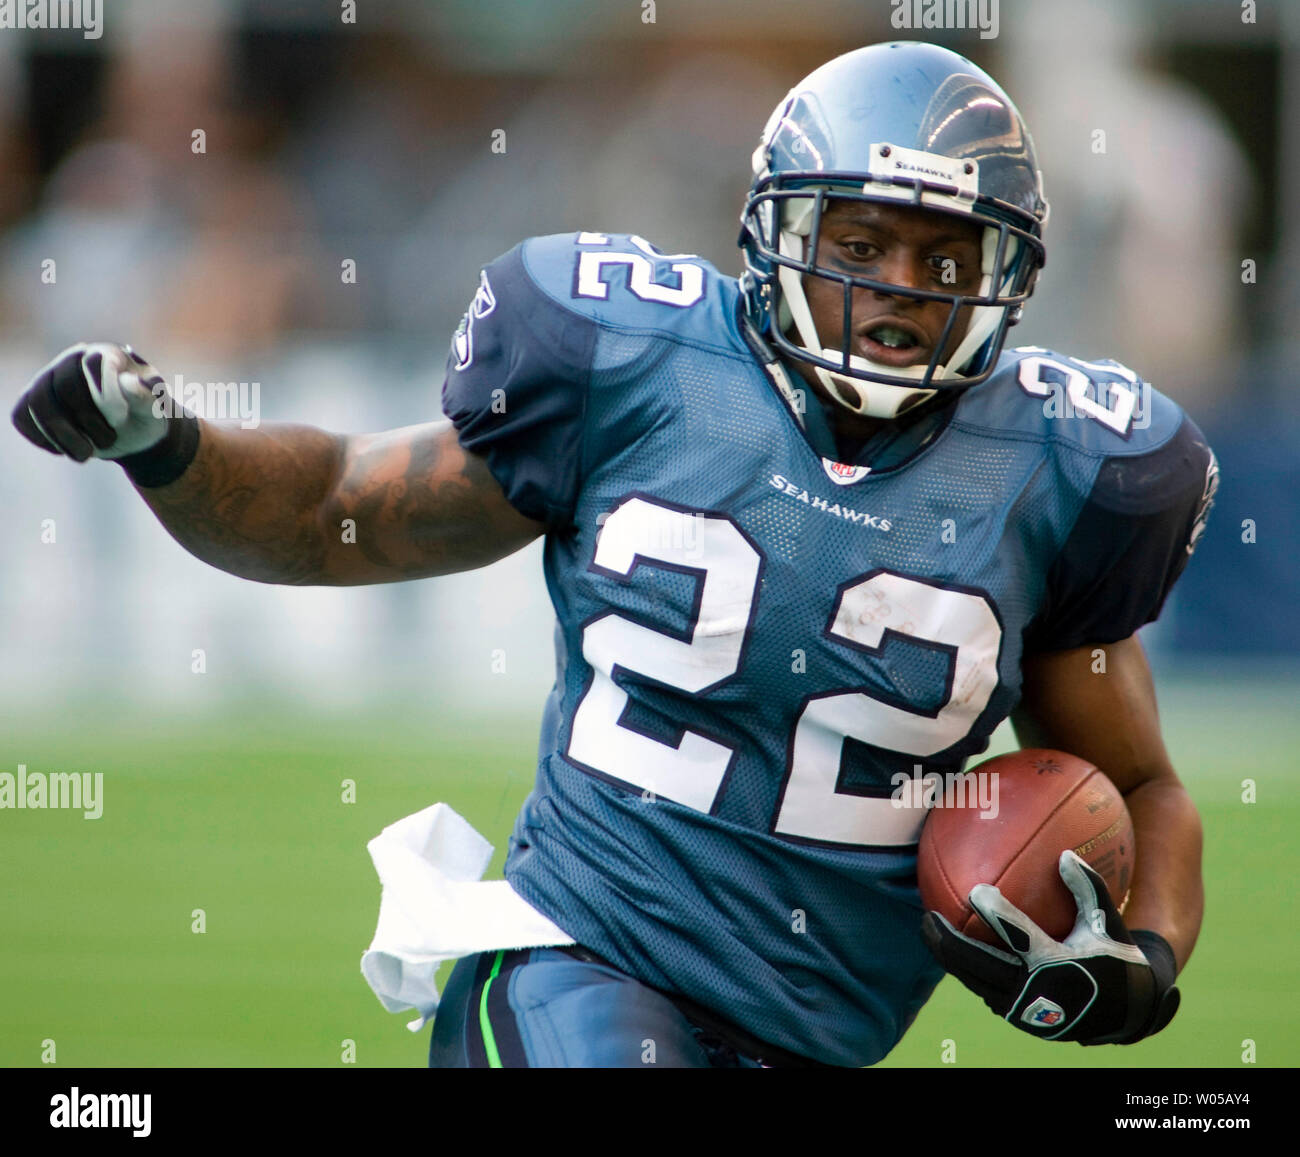 Seattle Seahawks running back Julius Jones (R) carries the ball against the  Chicago Bears in the first quarter at Qwest Field in Seattle on August 16,  2008. Jones rushed for 32 on